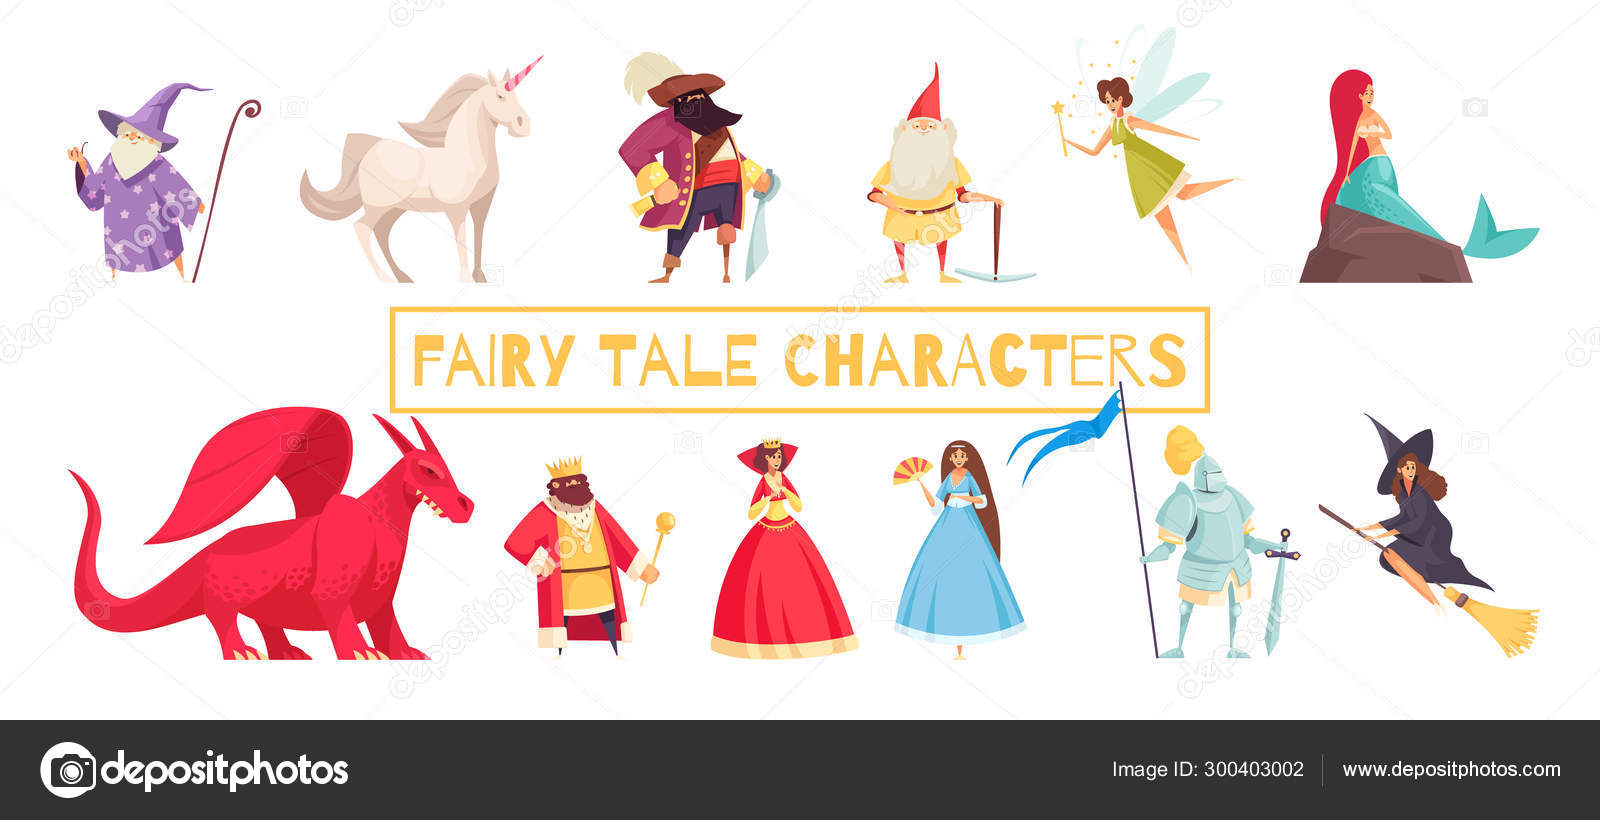 Fairy tale characters Vector Art Stock Images | Depositphotos